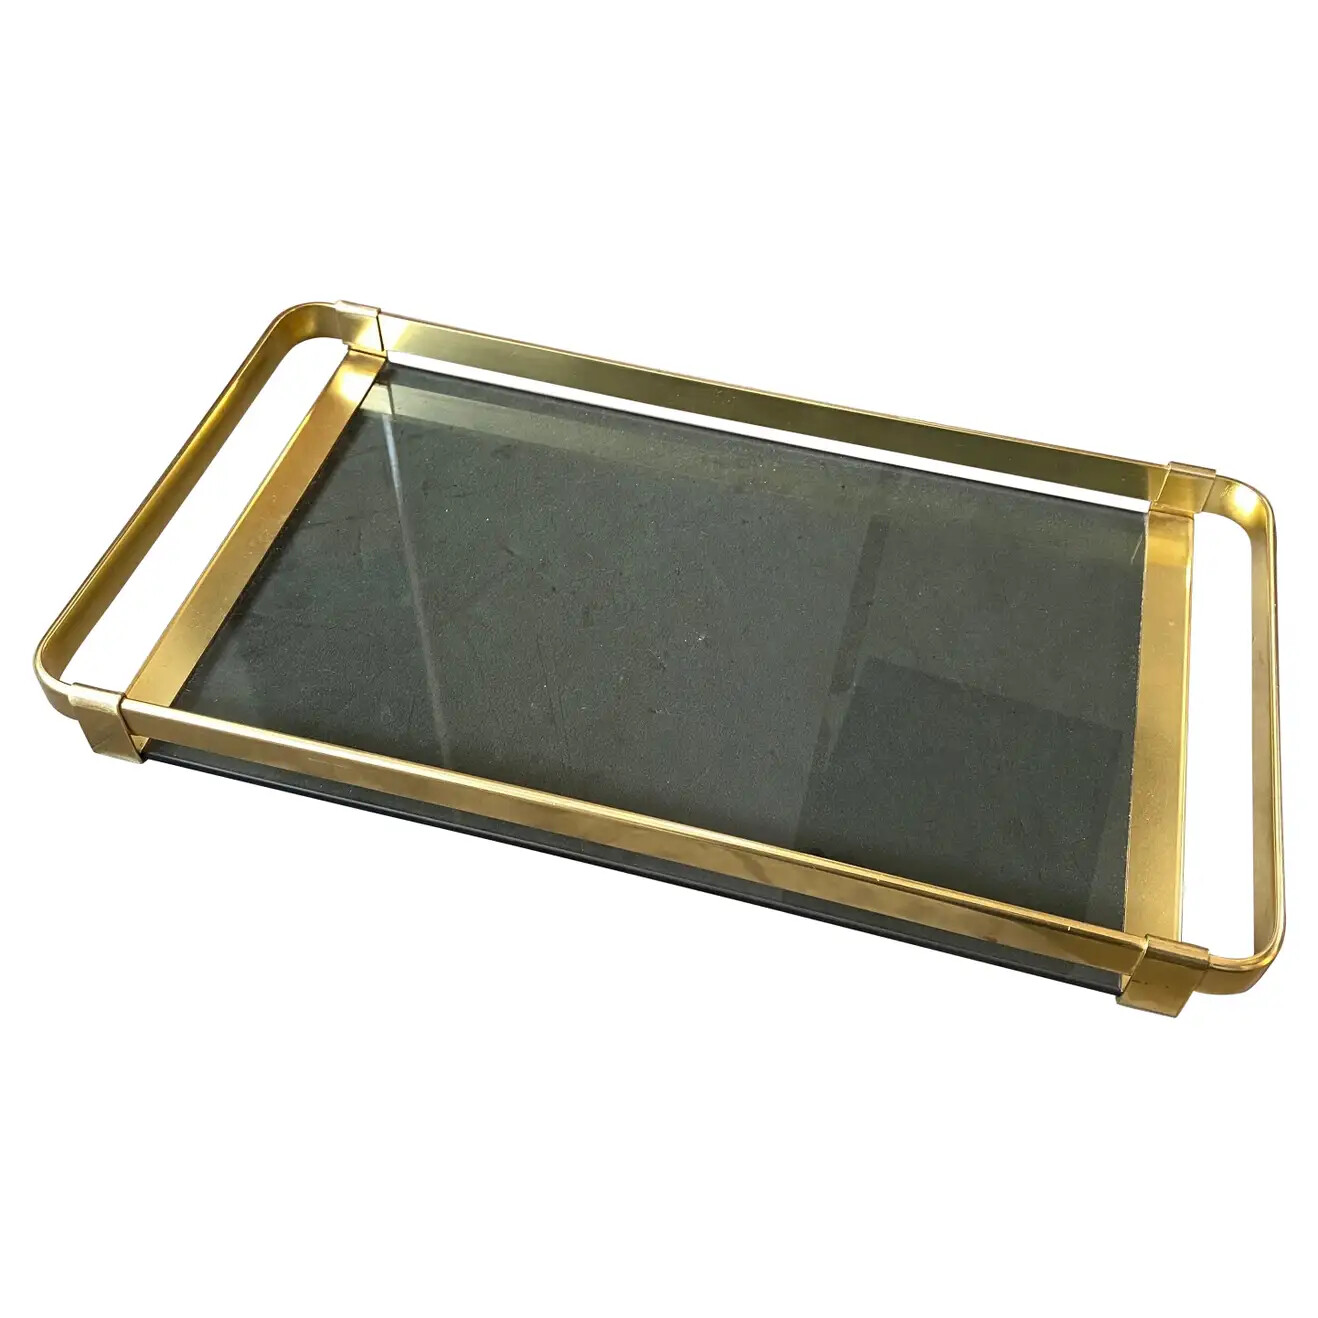 1960s Mid-Century Modern Brass and Smoked Glass Italian Serving Tray